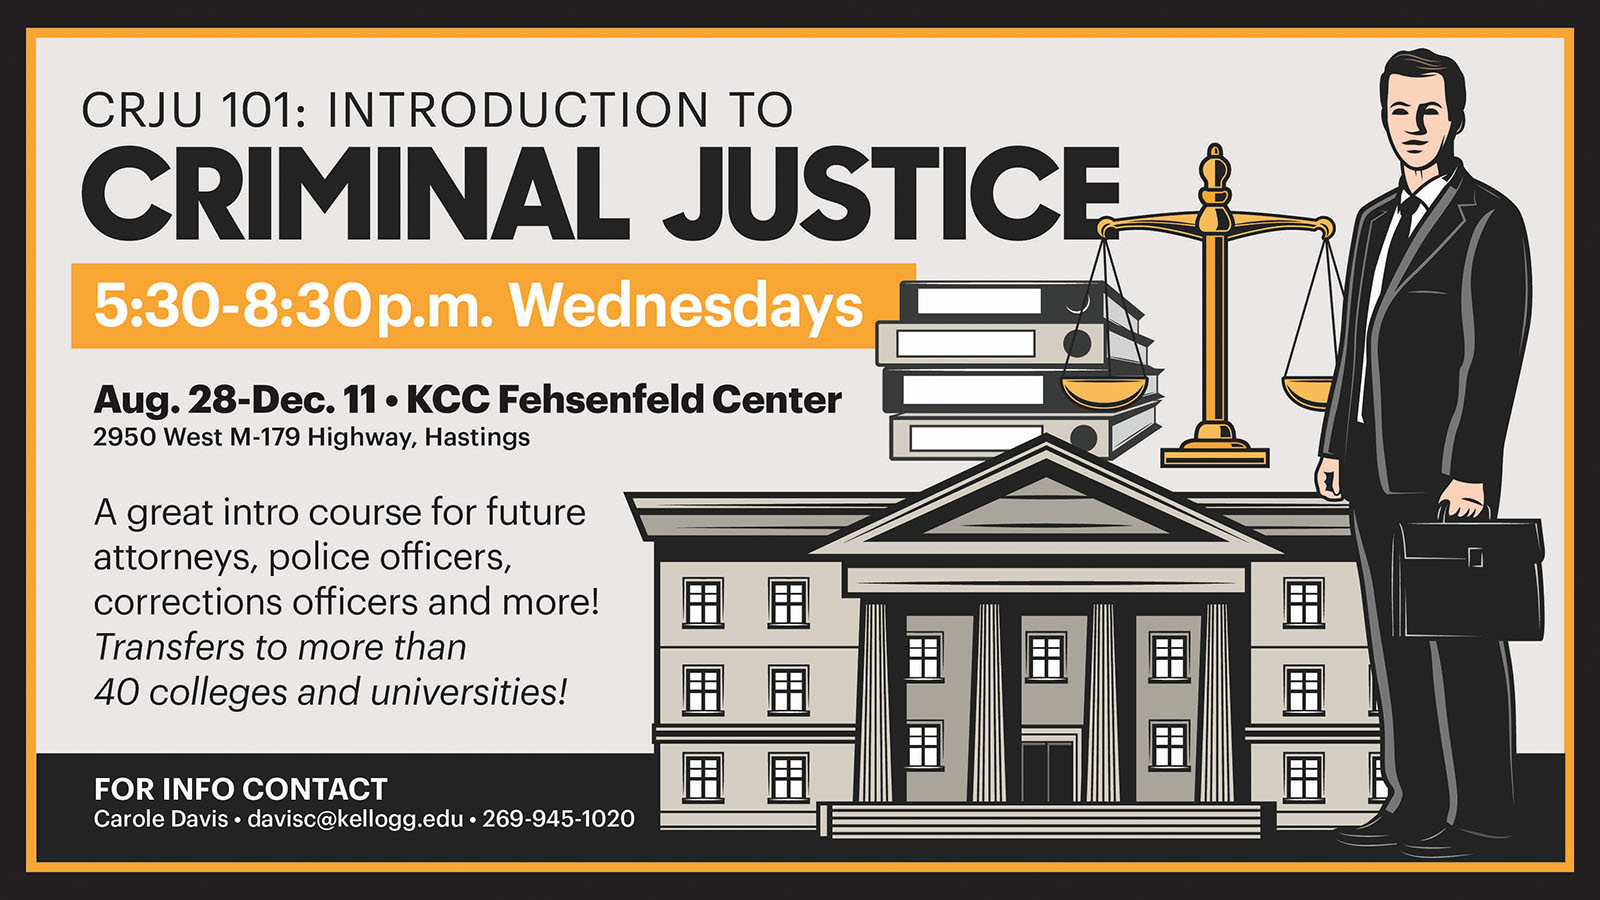 Illustration of a a man in a suit holding a briefcase in front of a building on a text slide that reads, "CRJU 101: Introduction to Criminal Justice. 5:30-8:30 p.m. Wednesdays. Aug. 28-Dec. 11. KCC Fehsenfeld Center. 2950 West M-179 Highway, Hastings. A great intro course for future attorneys, police officers, corrections officers and more! Transfers to more than 40 colleges and universities! For info contact Carole Davis at davisc@kellogg.edu or 269-945-1020."